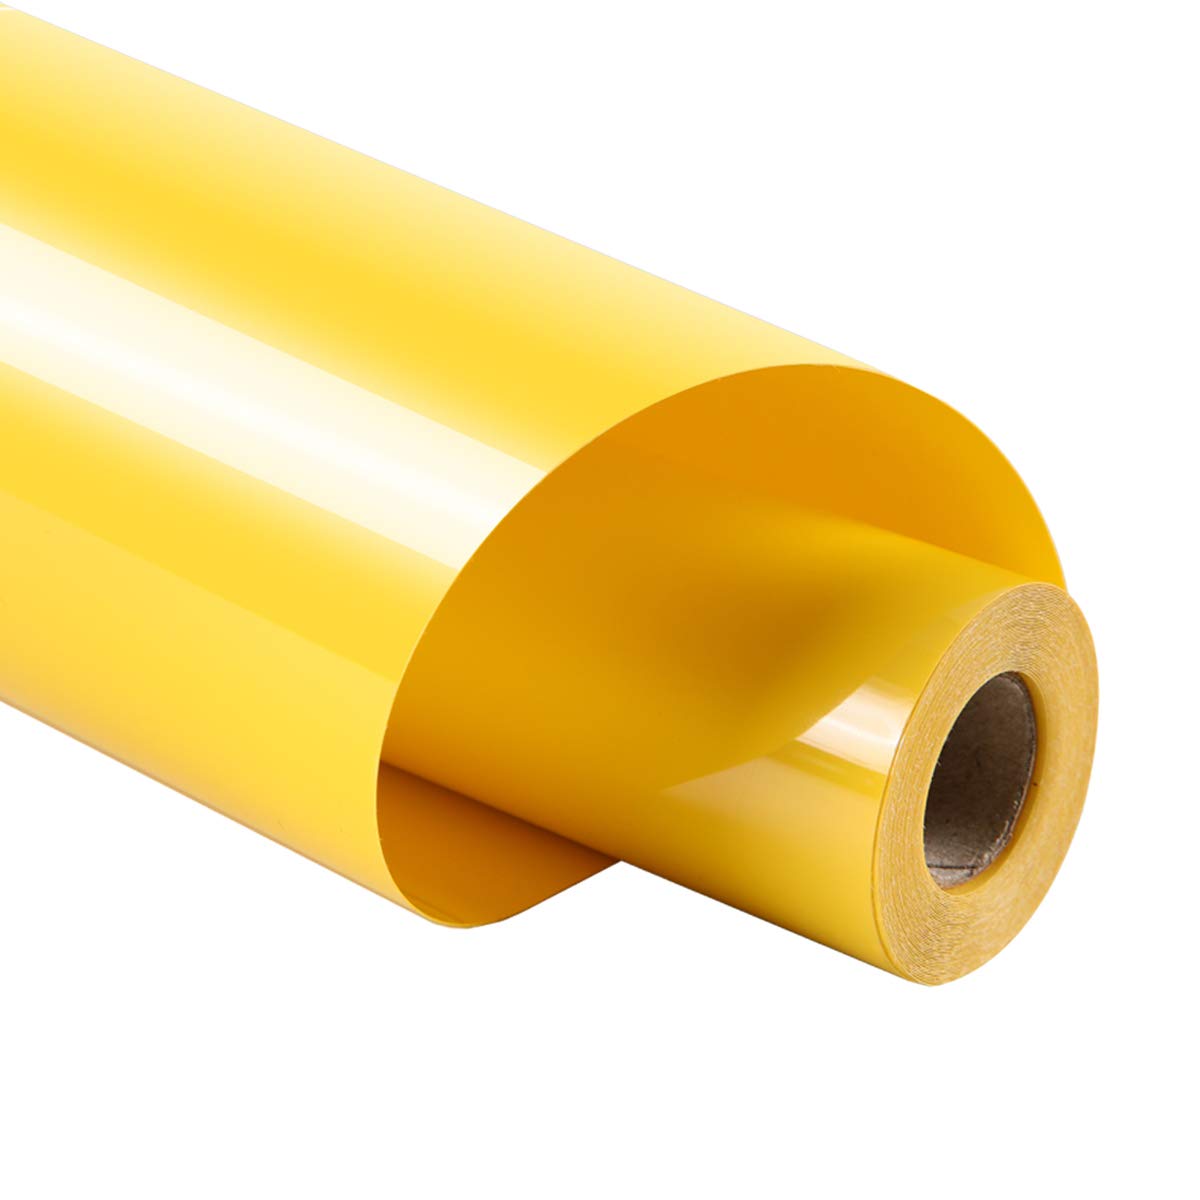 guangyintong Heat Transfer Vinyl for T-Shirts 12 x 8ft - Yellow HTV Vinyl  Roll Iron on-Easy to Cut &Weed Glossy Surface (Yellow k3) 01- Yellow K3